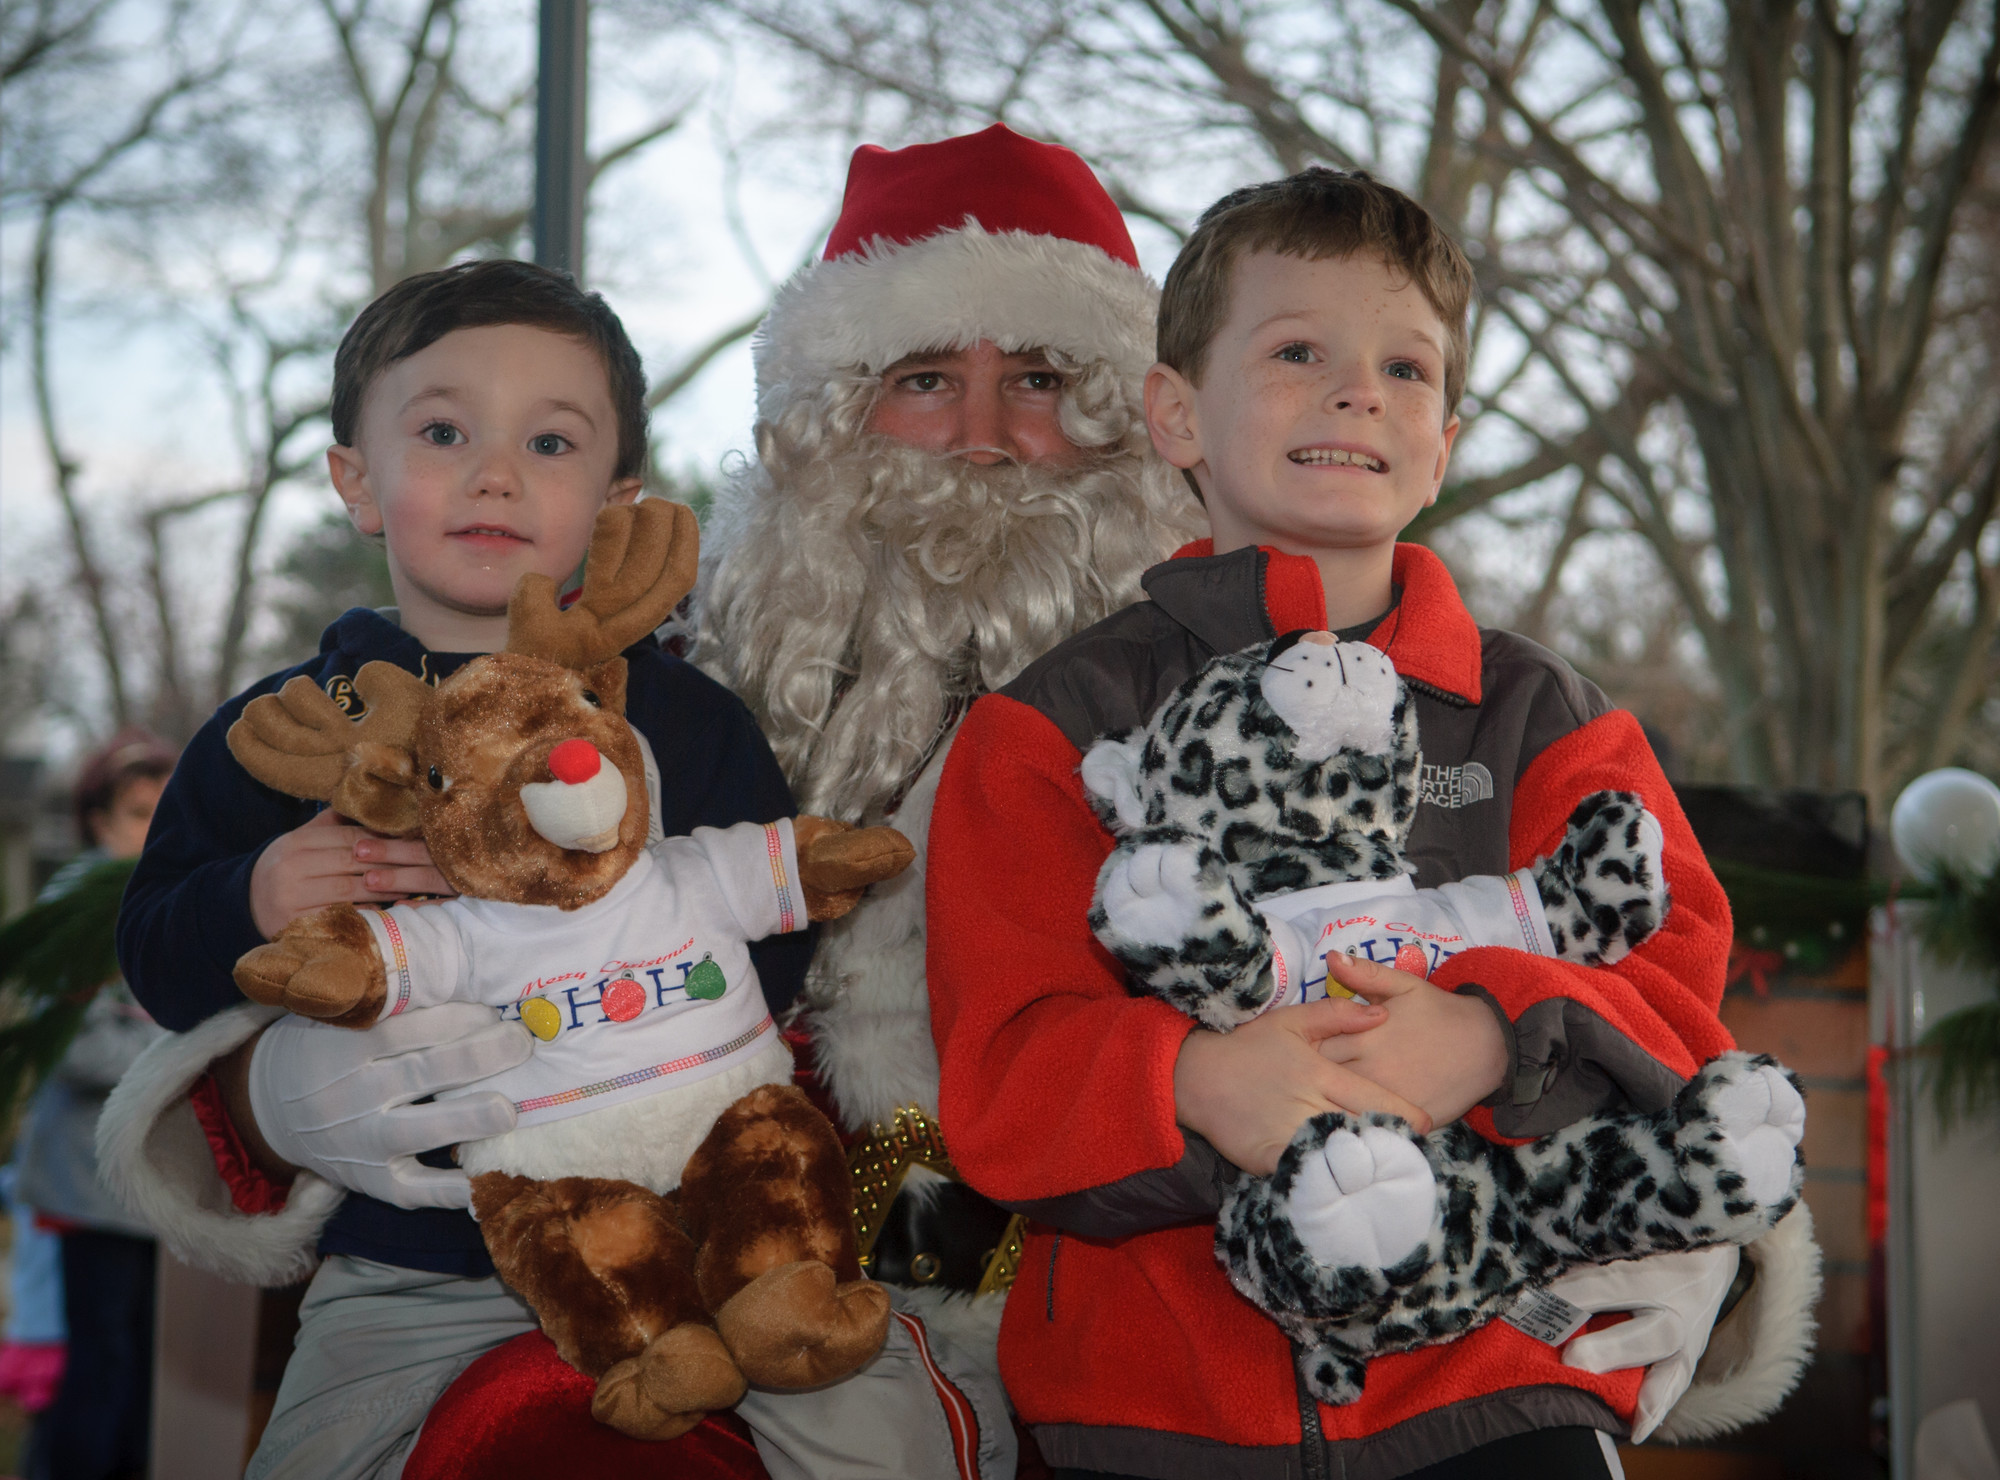 Brendan and Ryan of W. Hempstead visited with Santa after creating their their new stuffed animals at the "stuff-a-bear" table.